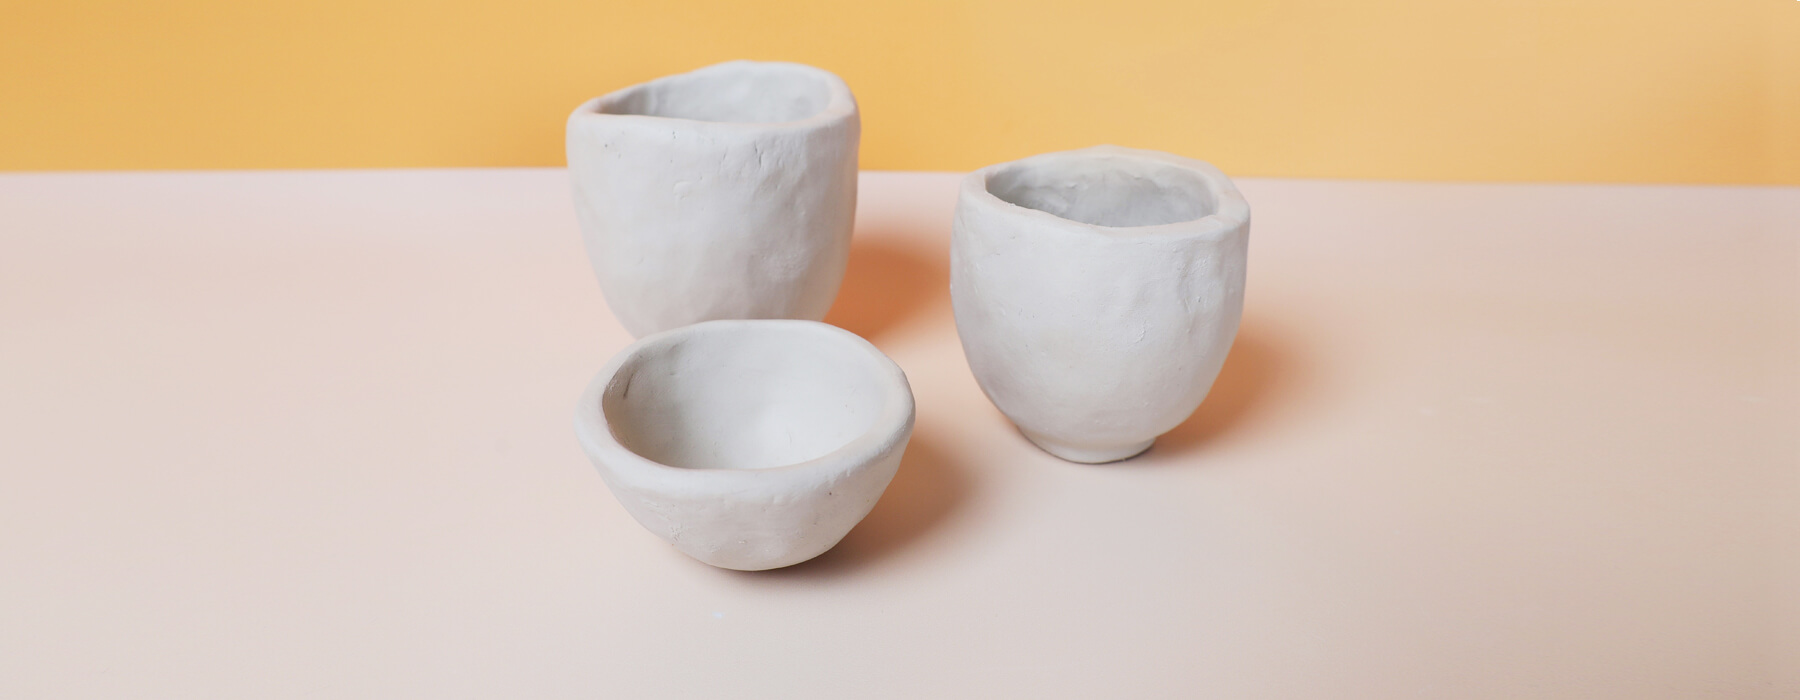 Basic Hand Building in Pottery - How to make a pinch pot